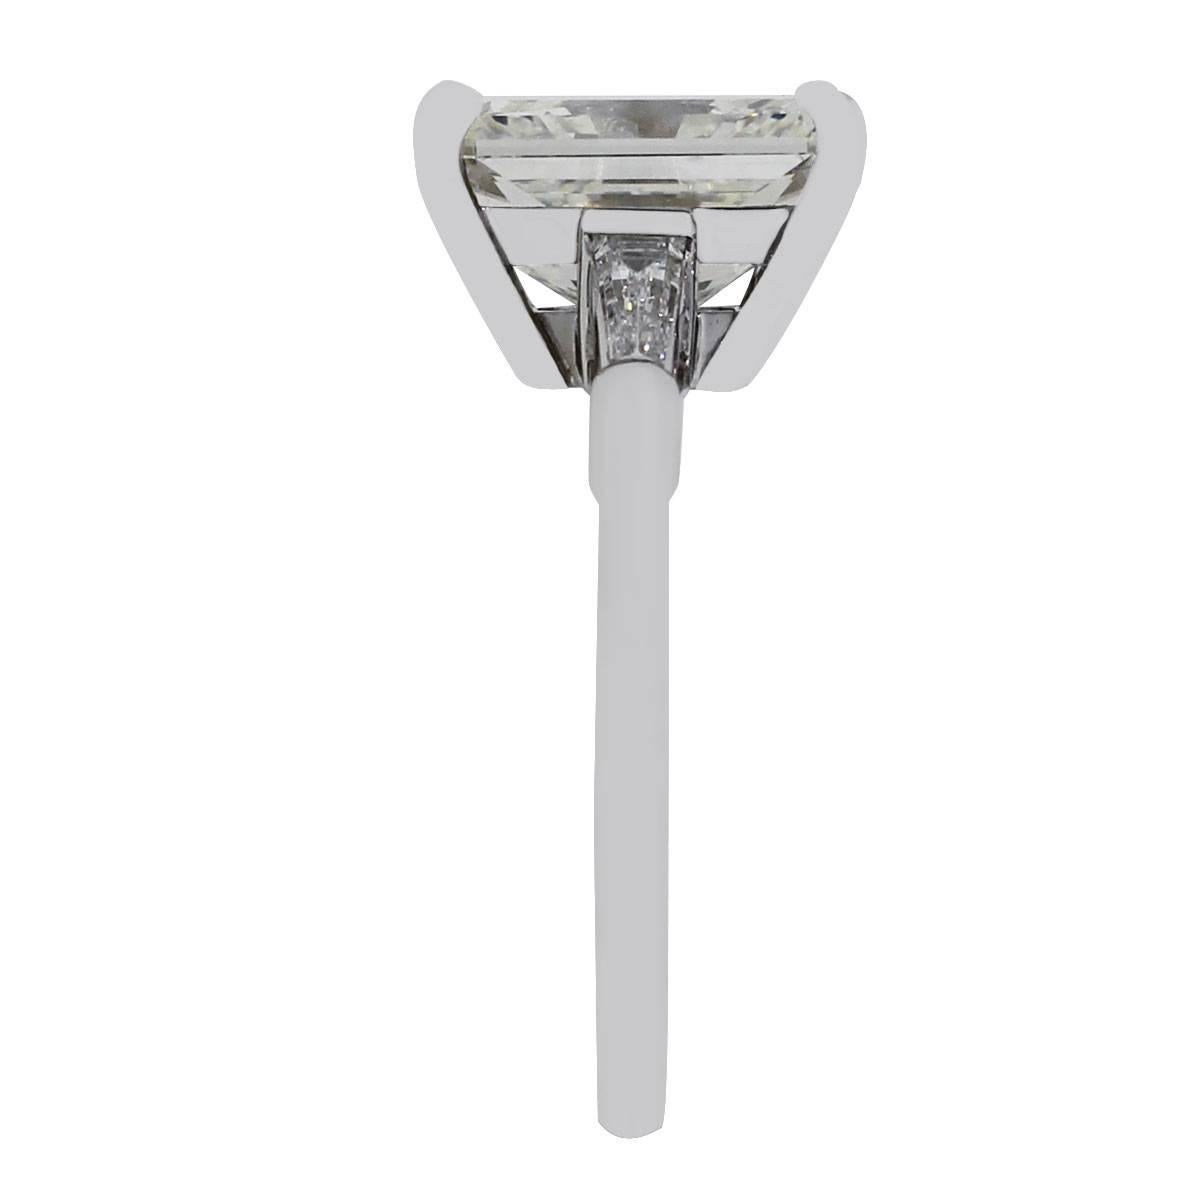 Material: 14k white gold
Center Diamond Details: 5.07ct radiant cut diamond. Center diamond is J in color and VS2 in clarity. Center diamond is GIA certified (2175352615)
Diamond Details: Approximately 0.20ctw baguette cut diamonds.
Size: 7.75
Total